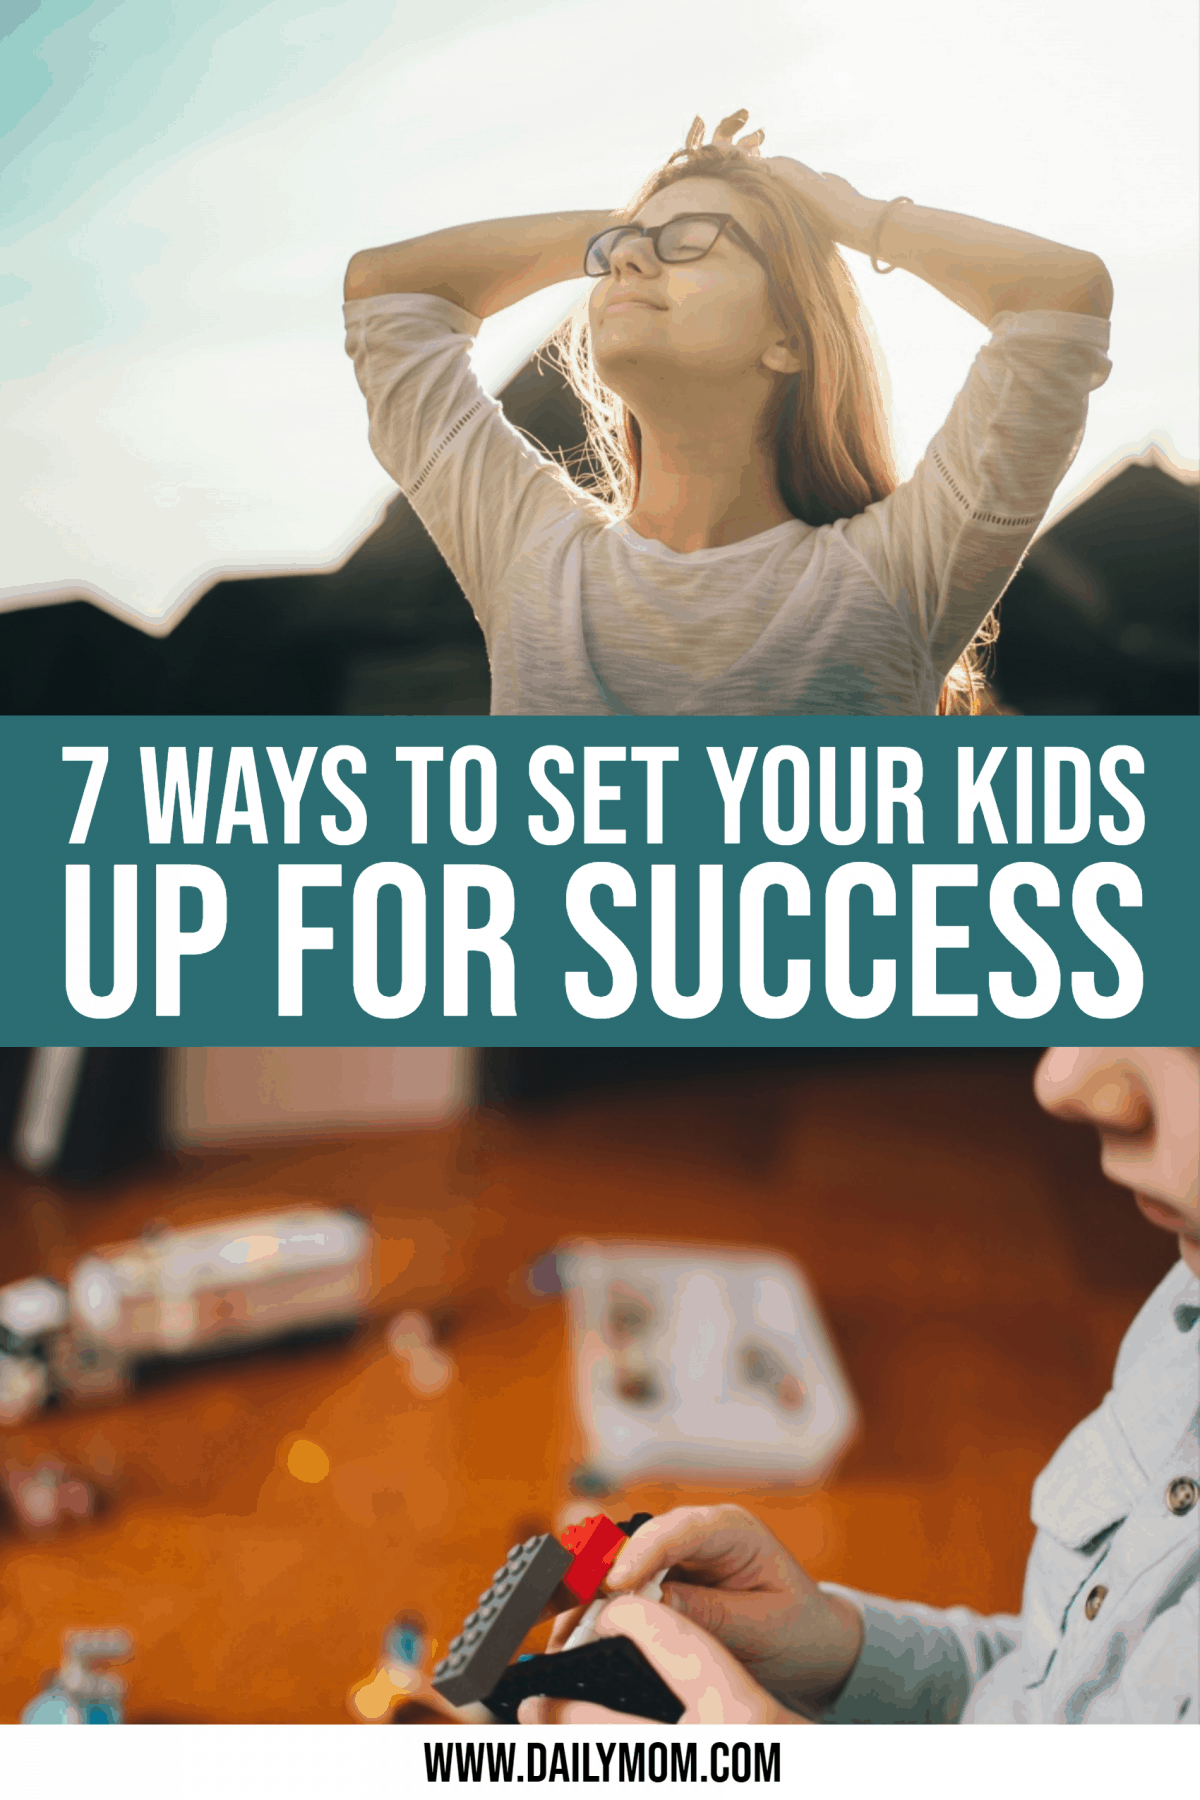 7 Ways To Set Your Kids Up For Success